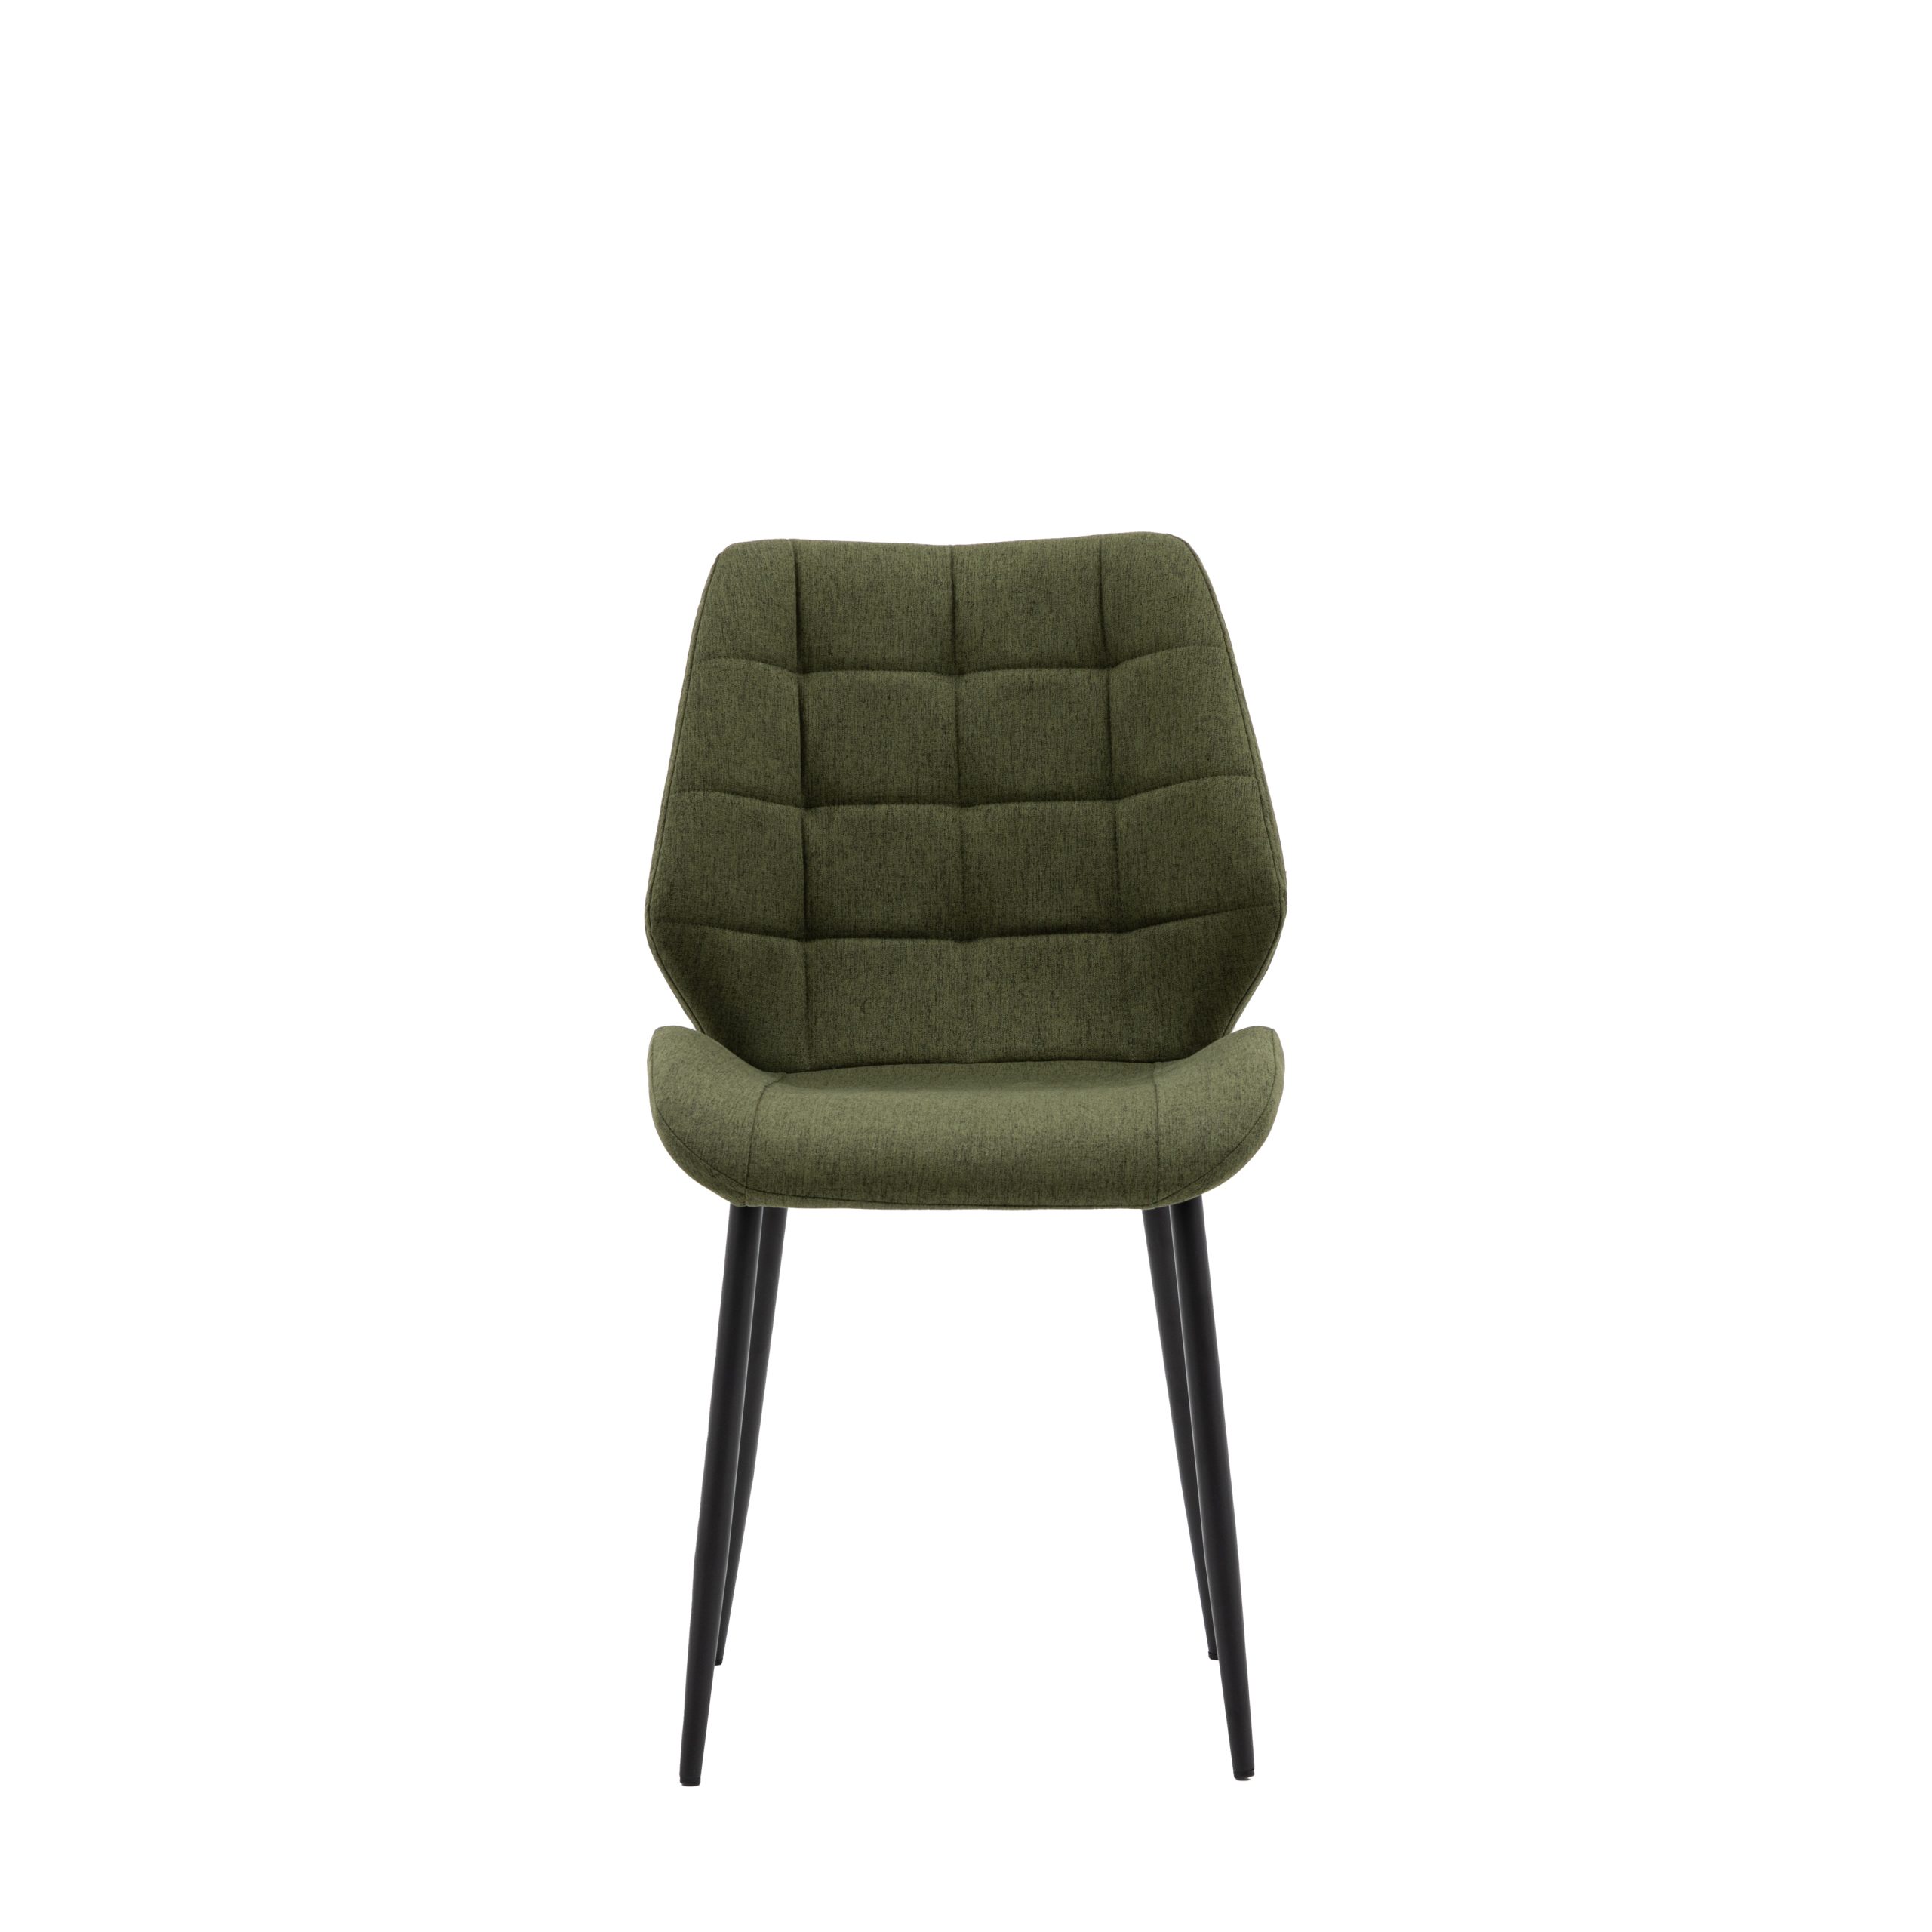 Gallery Direct Manford Dining Chair Bottle Green (Set of 2)